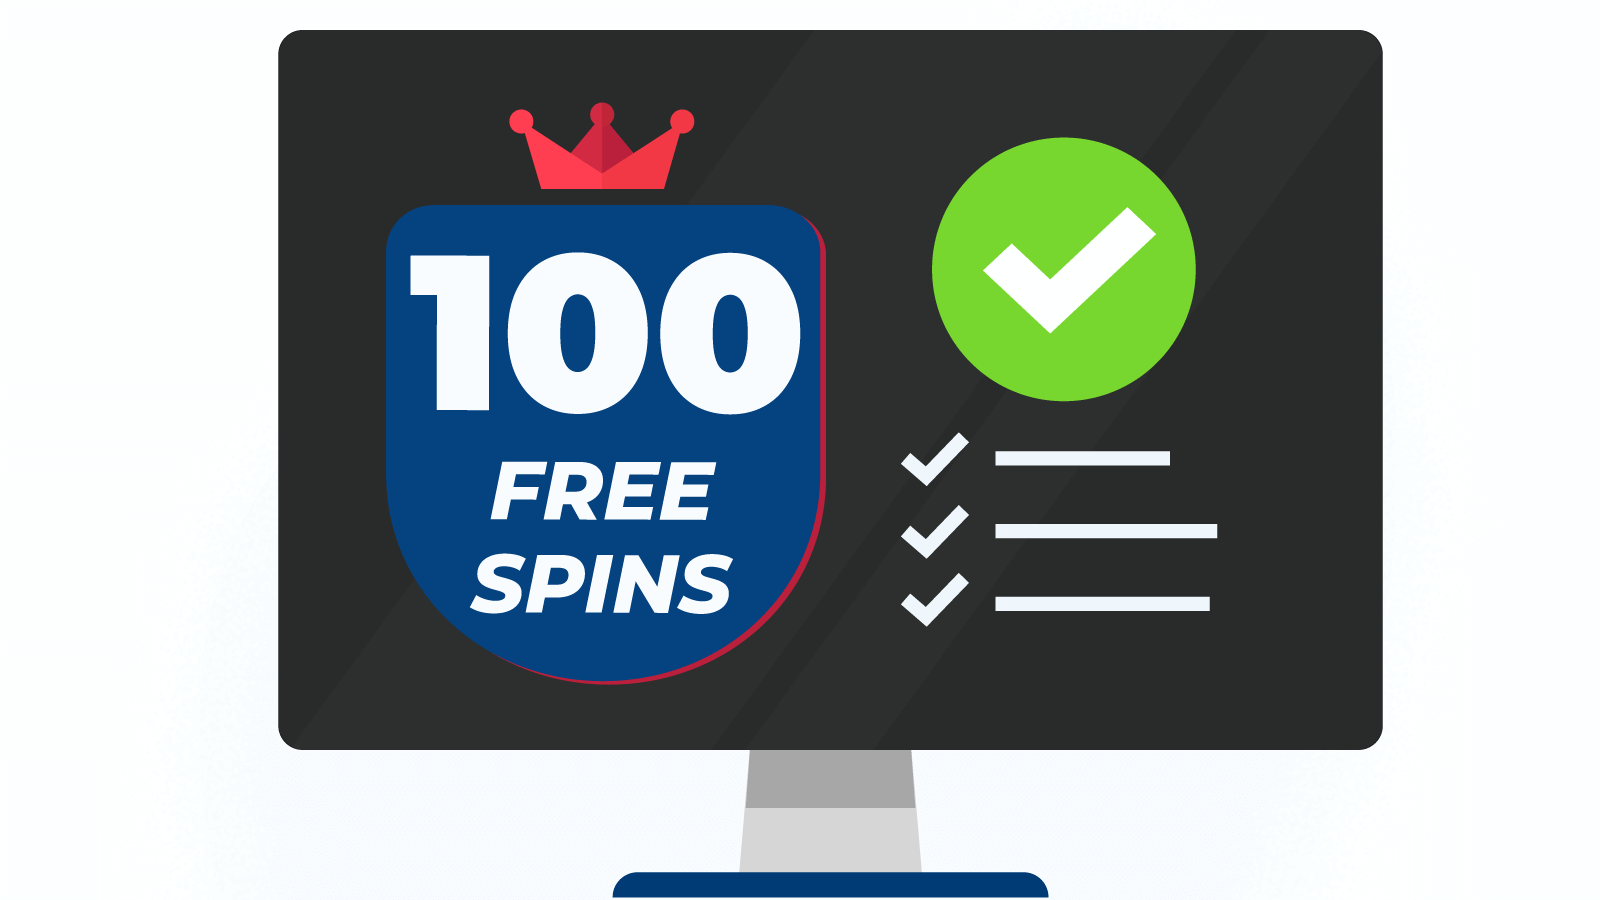 Why You Should Try the 100 Free Spins Bonuses